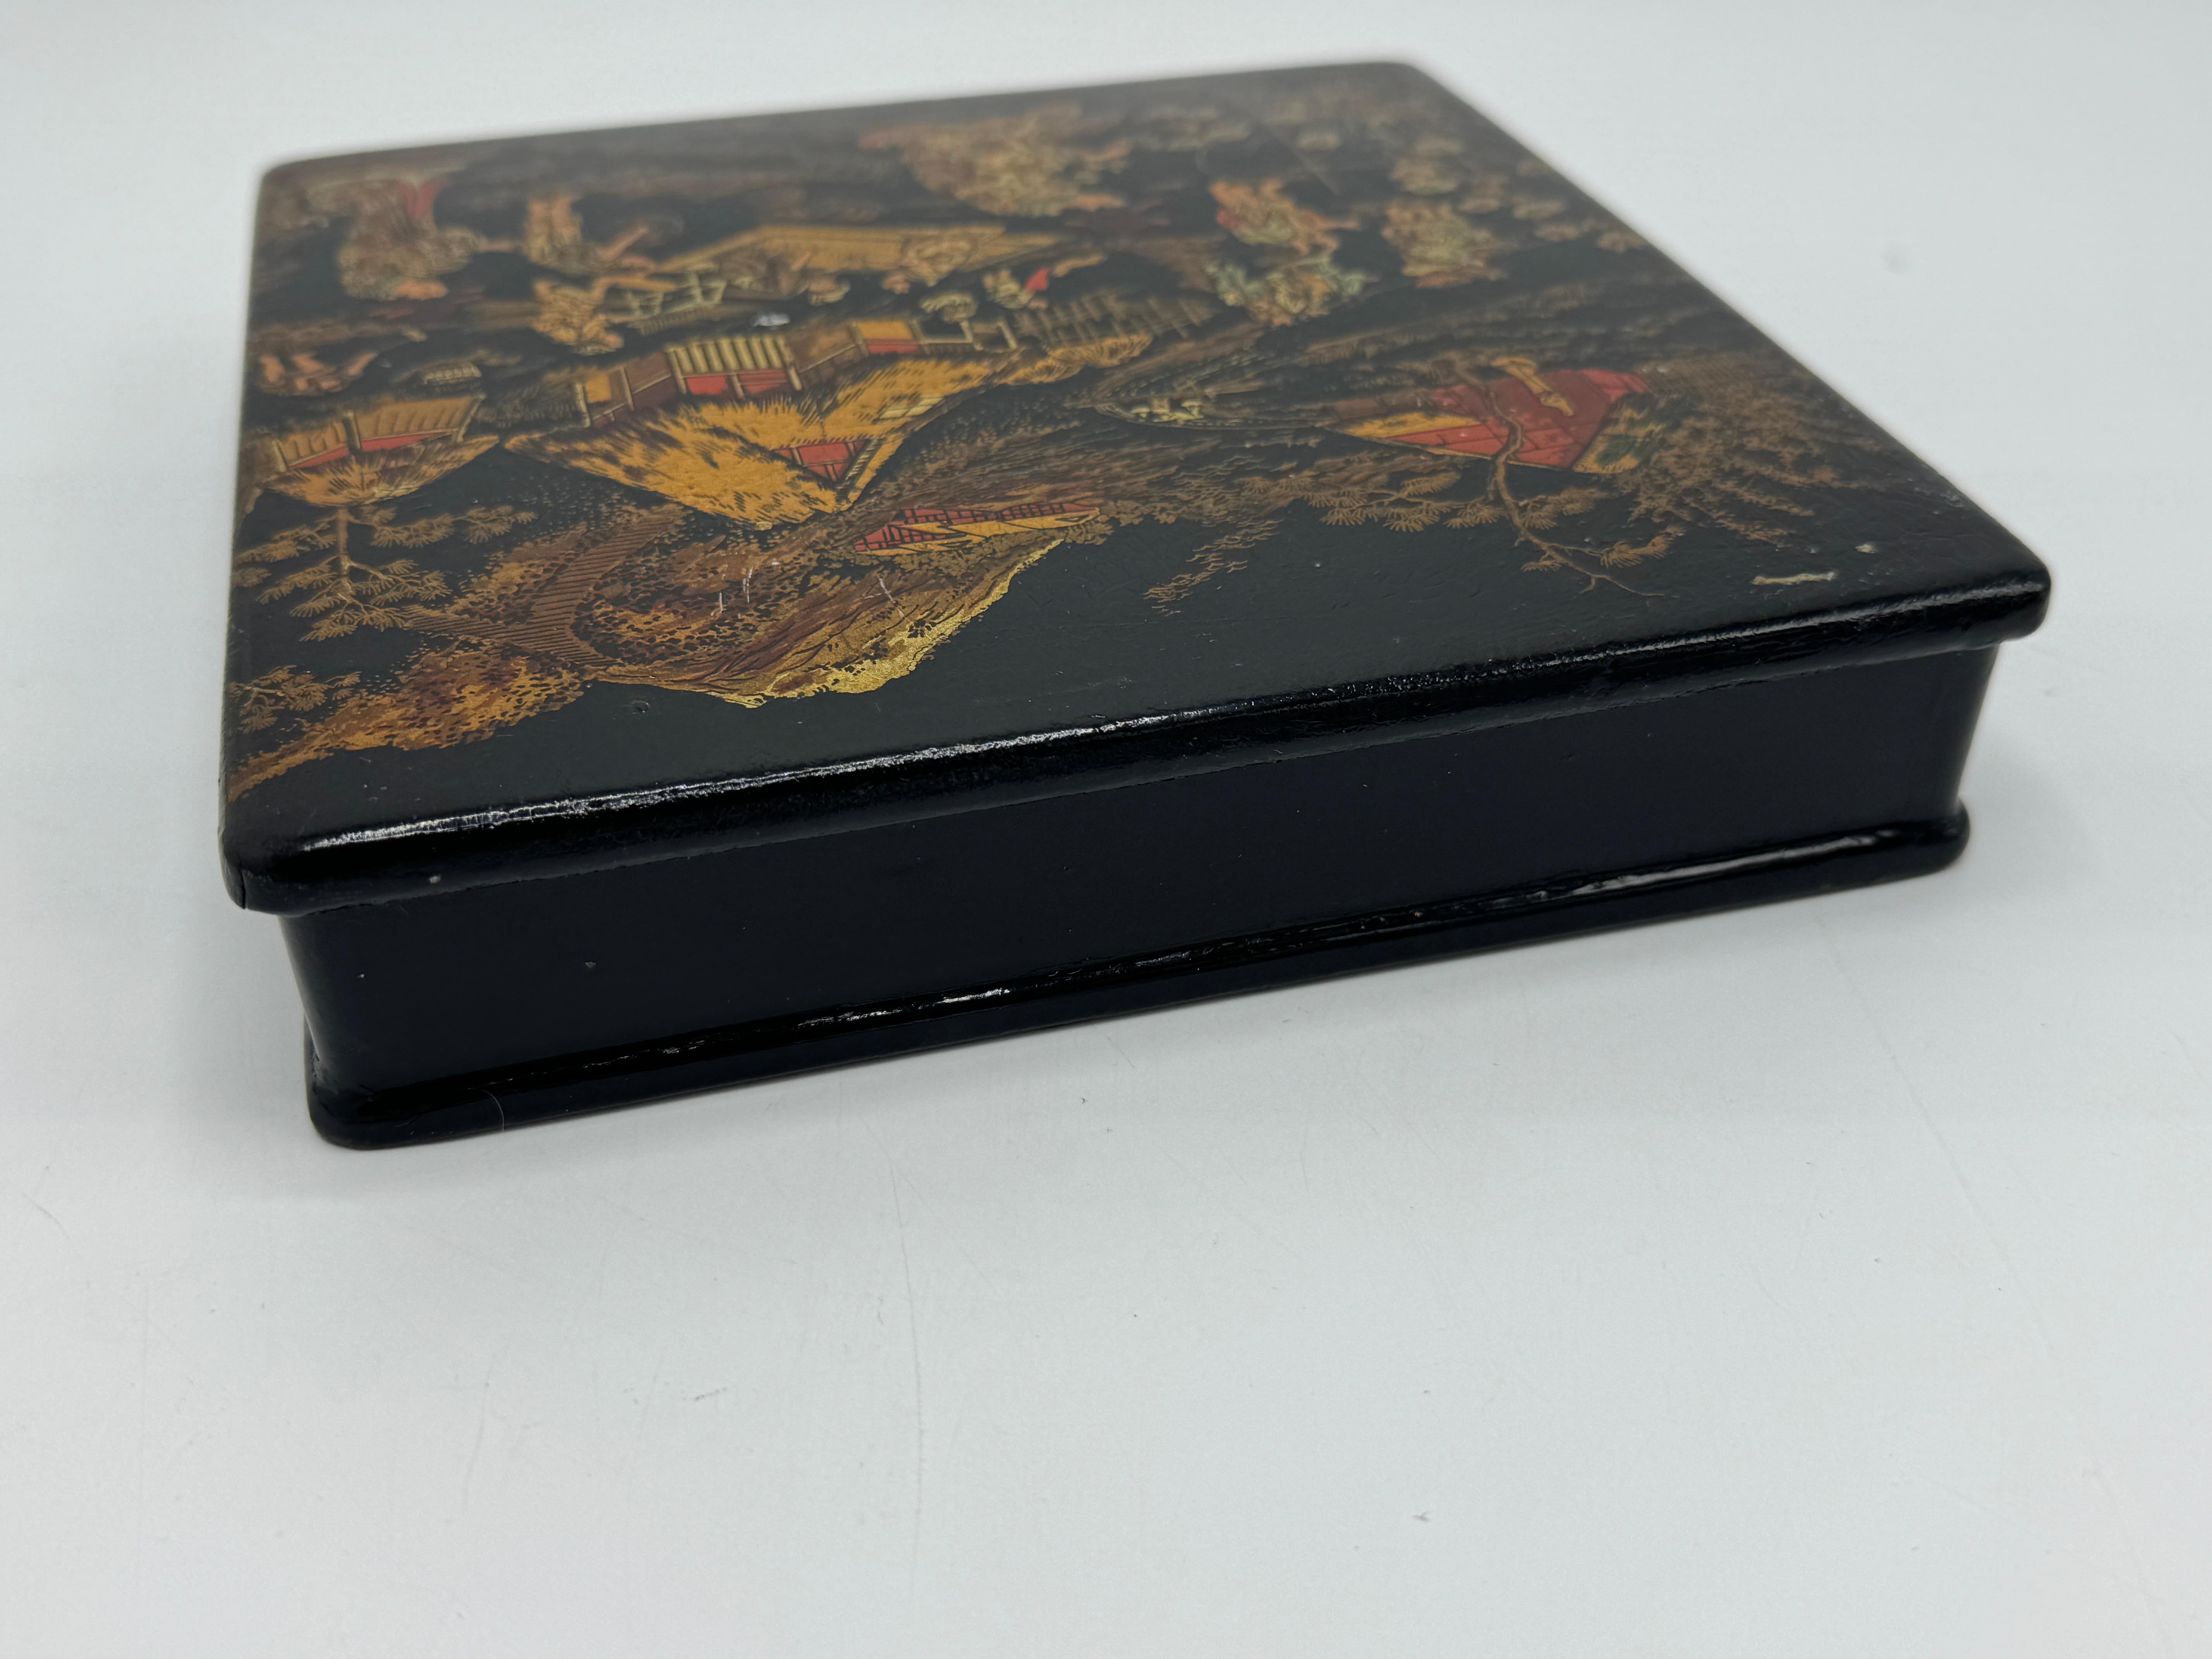 Offered is an excellent example of 19th century French papier mâché in the form of a square box, decorated with gold and red Chinoiserie scenes on black lacquer. While Eastern in design, the Chinoiserie craze swept France in the 1800's, leading to